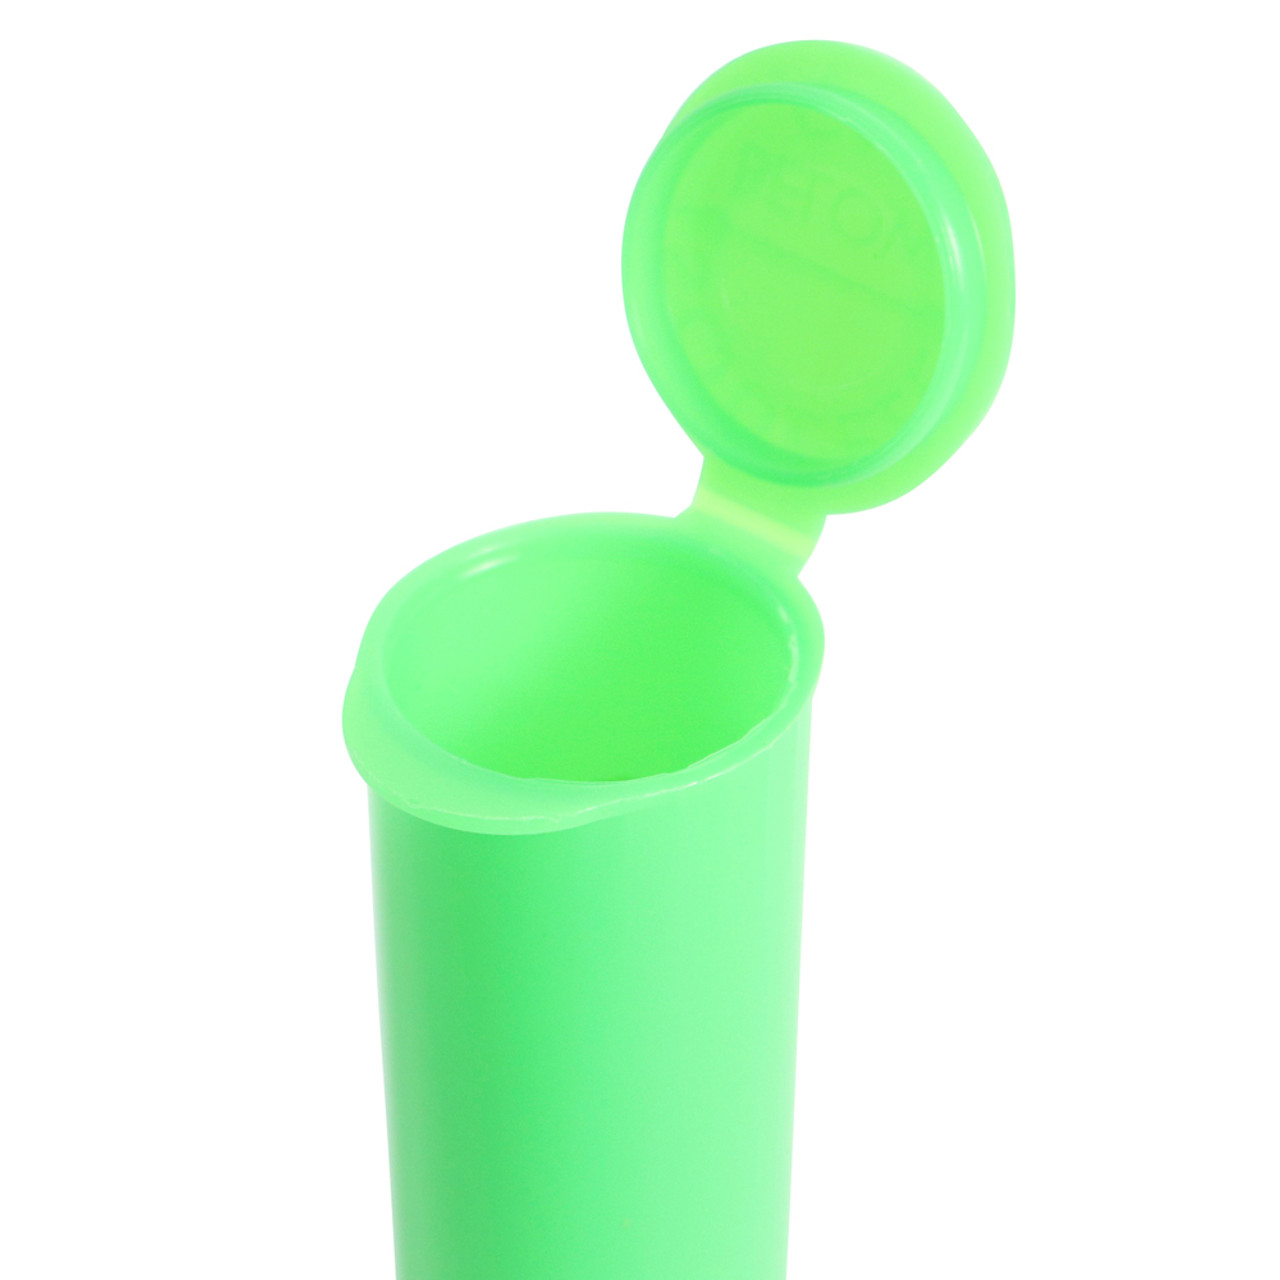 116mm Tech-line Pre-Roll Tube - Lime Green - Child Resistant Made in USA